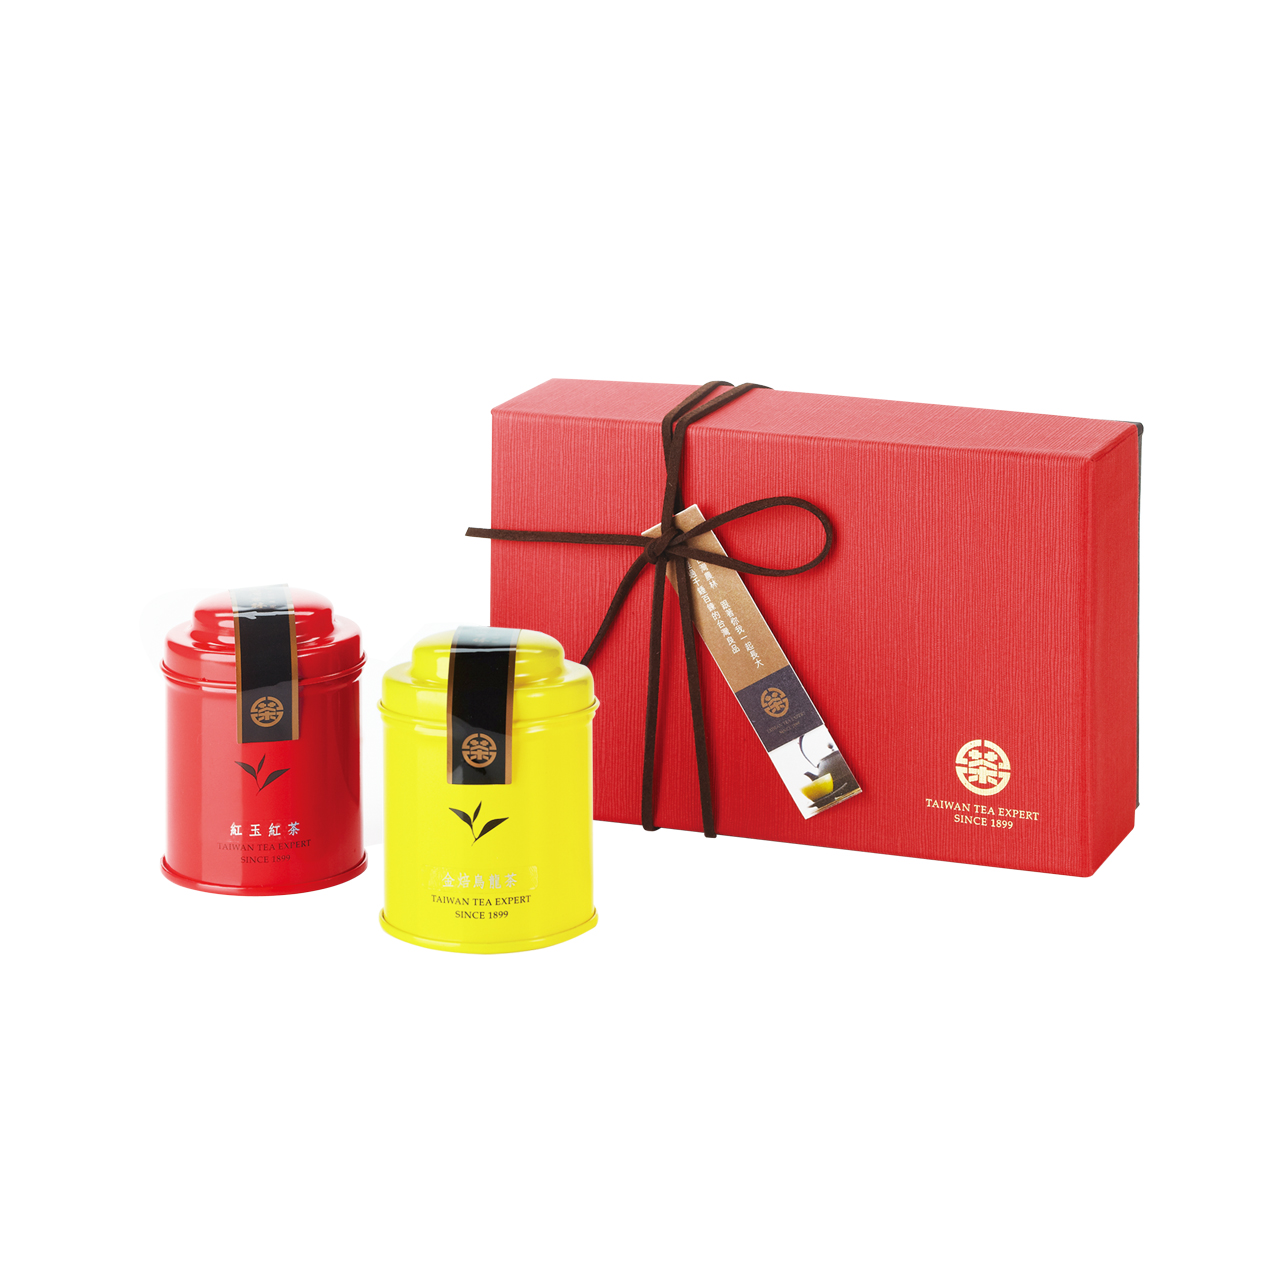 Fashion Tea Collection in Two (Gift Box)Red Jade Black Tea+Golden Daylily Oolong Tea